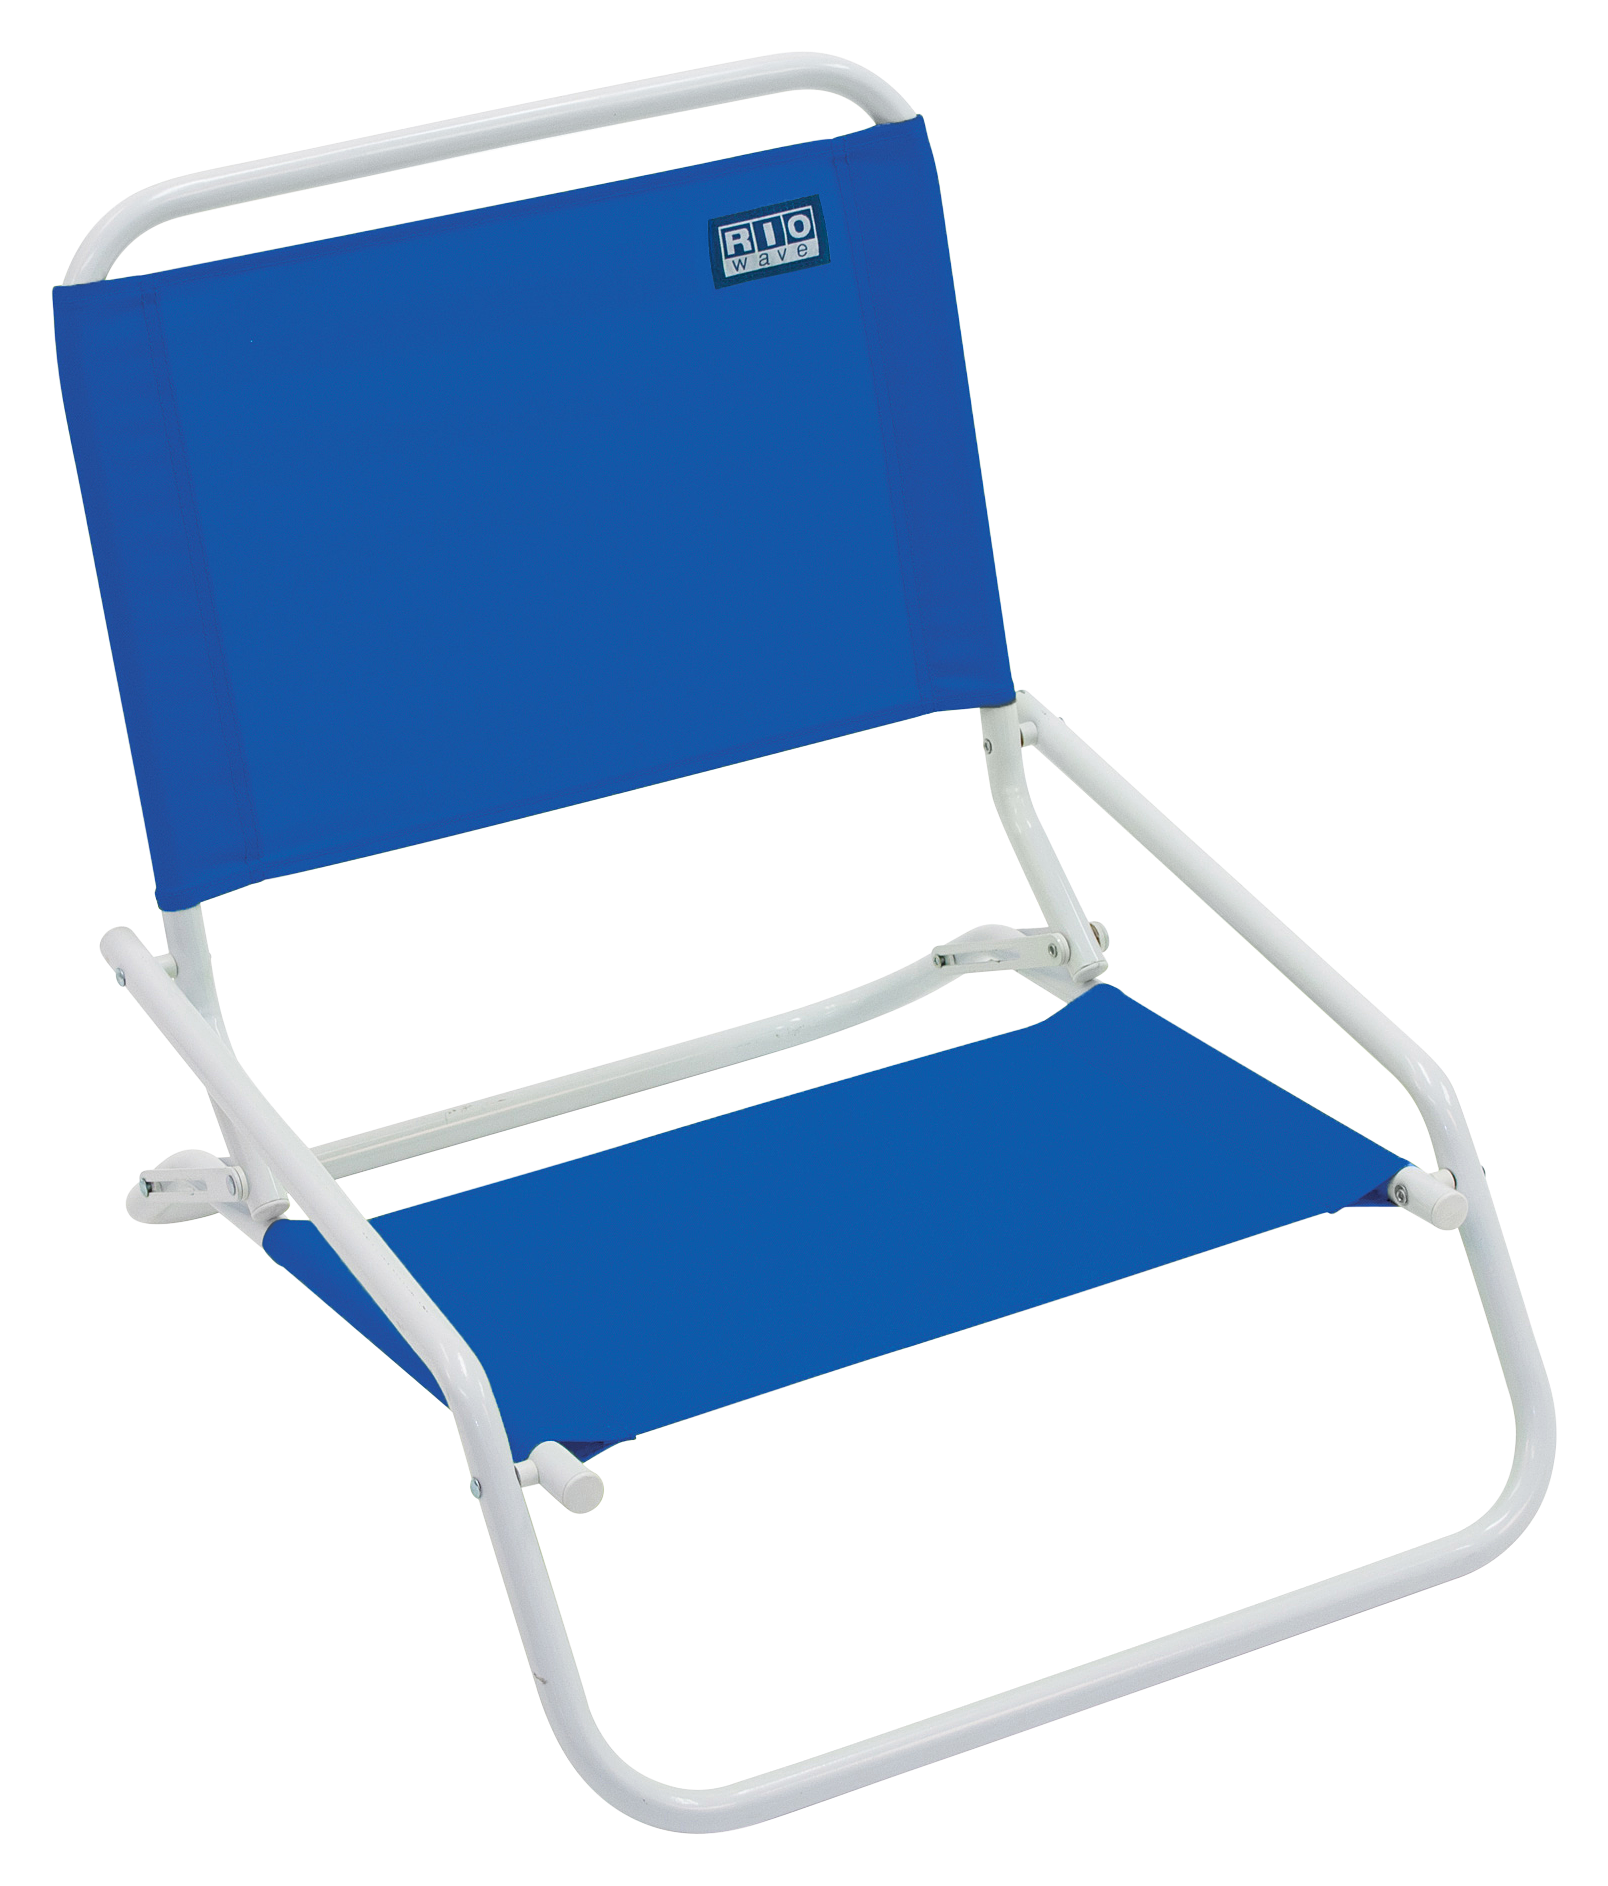 Rio Brands 1-Position Sand Chair - Pacific Blue